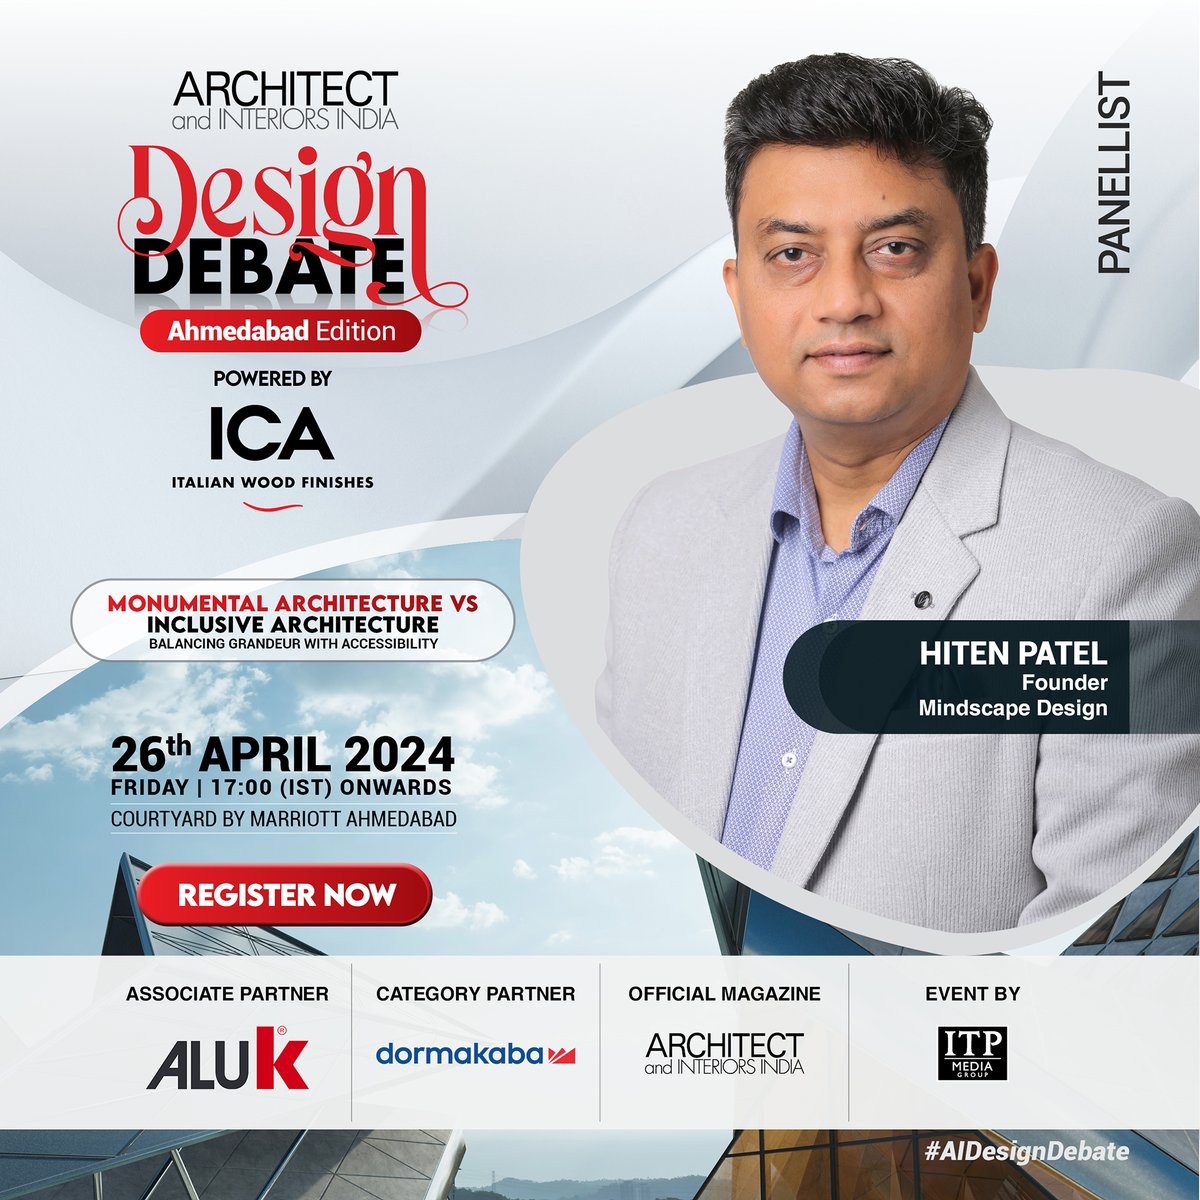 We are elated to welcome Hiten Patel - Founder, Mindscape Design as one of the eminent Doyens panellists at the #AIDesignDebate - Ahmedabad Edition Powered by ICA Pidilite.

Register Now - bit.ly/3xqiAdT
26th April 2024 | Courtyard by Marriott Ahmedabad